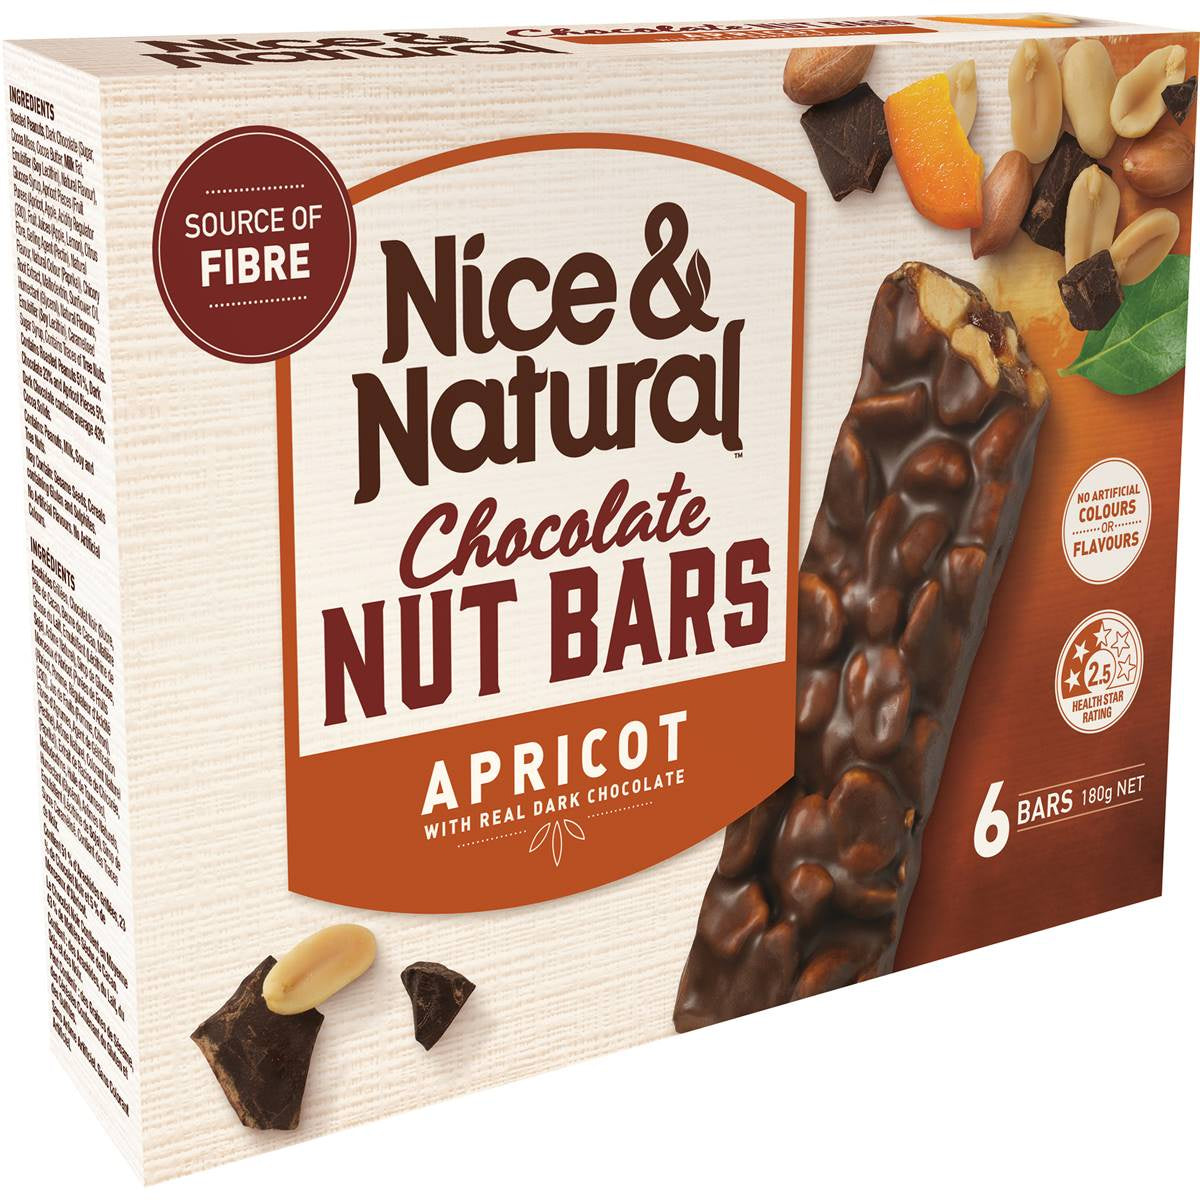 Nice & Natural Chocolate Nut Bar Apricot 6 Pack